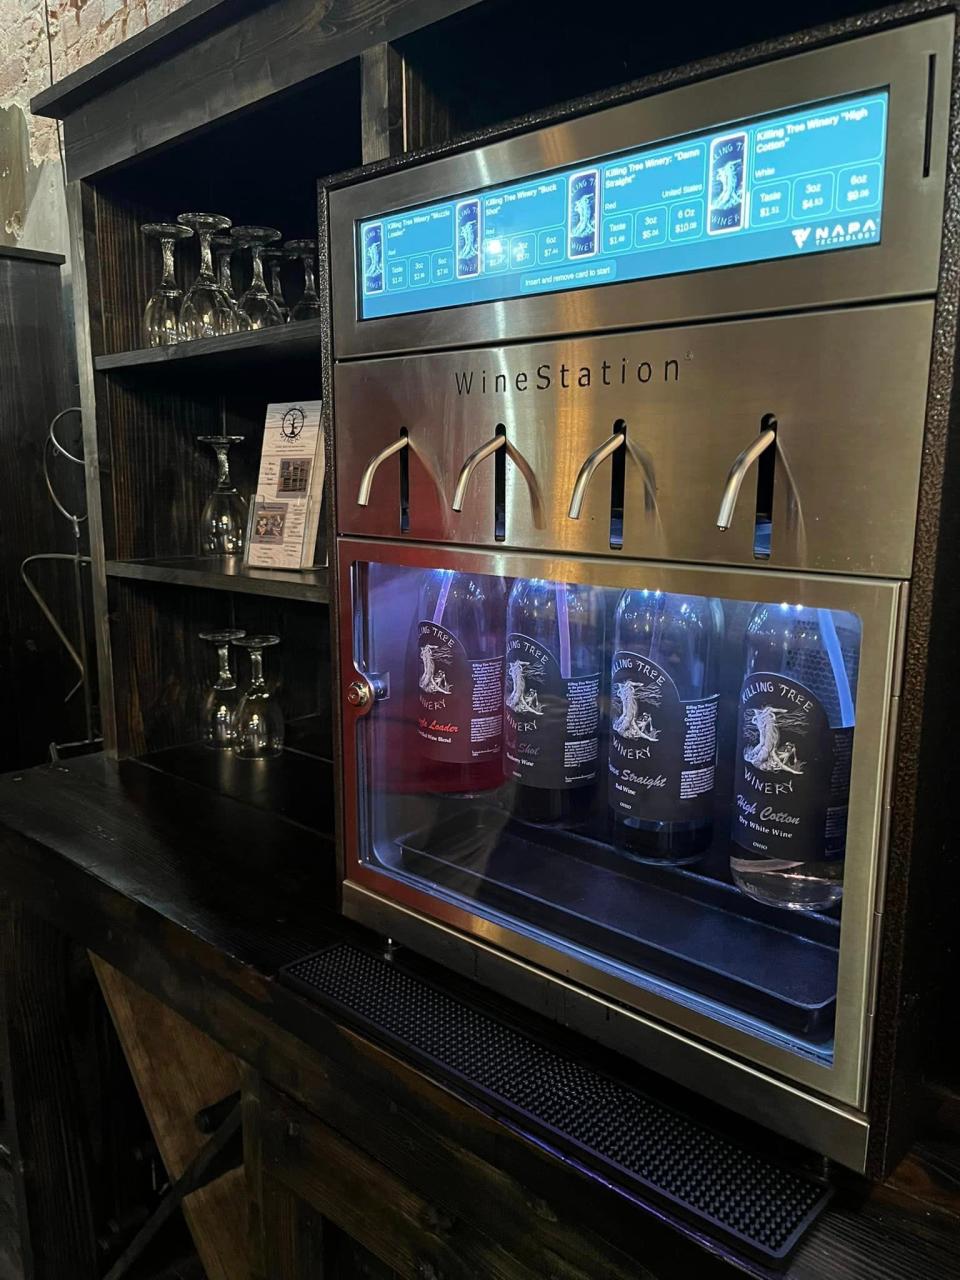 The owners of A Taste of Ohio, Wine, Bourbon & Beer came up with the self-serve concept collectively. Shown is one example of the stations offered: the wine station.